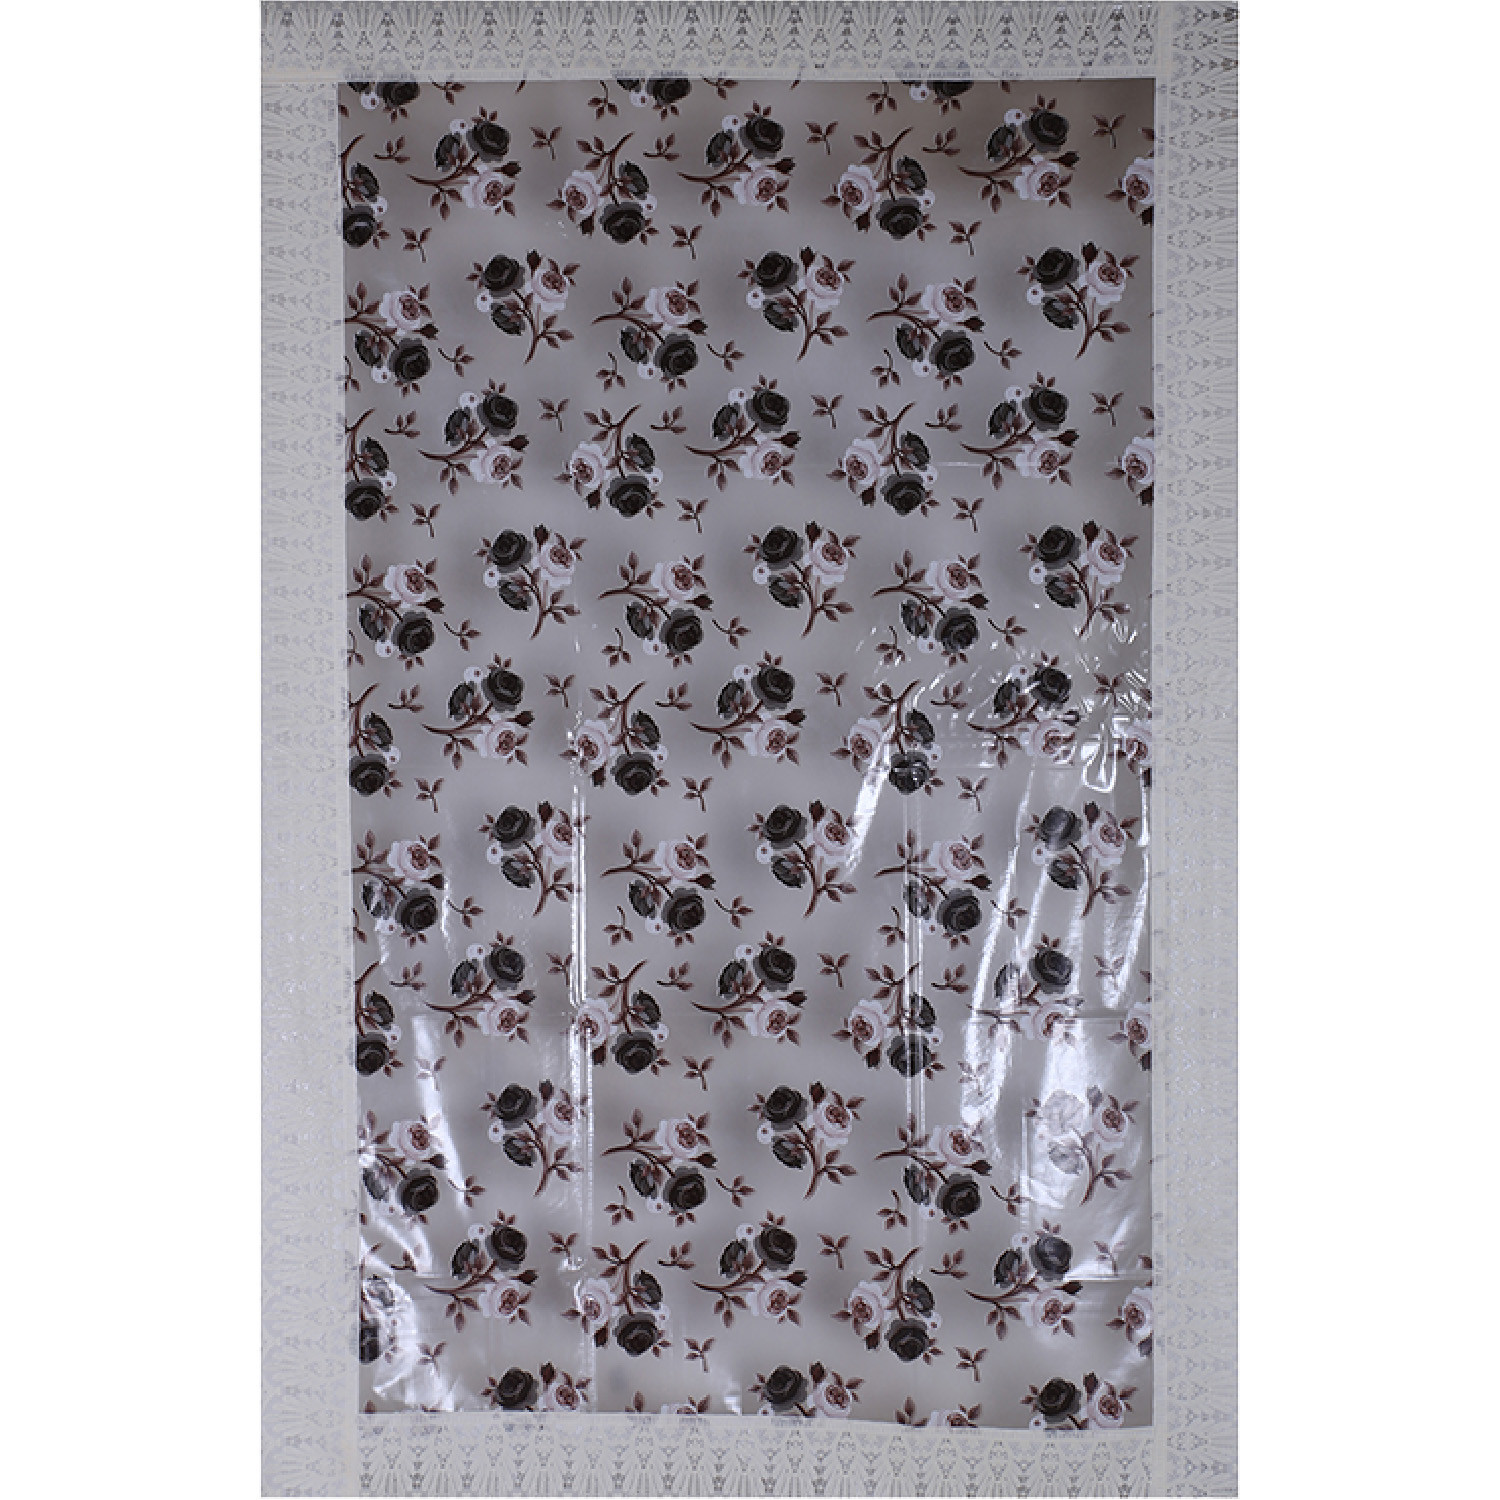 Kuber Industries PVC Waterproof Attractive Rose Design Center Table Cover|Table Cloth With Cream Lace Border, 40x60 inch (Cream)